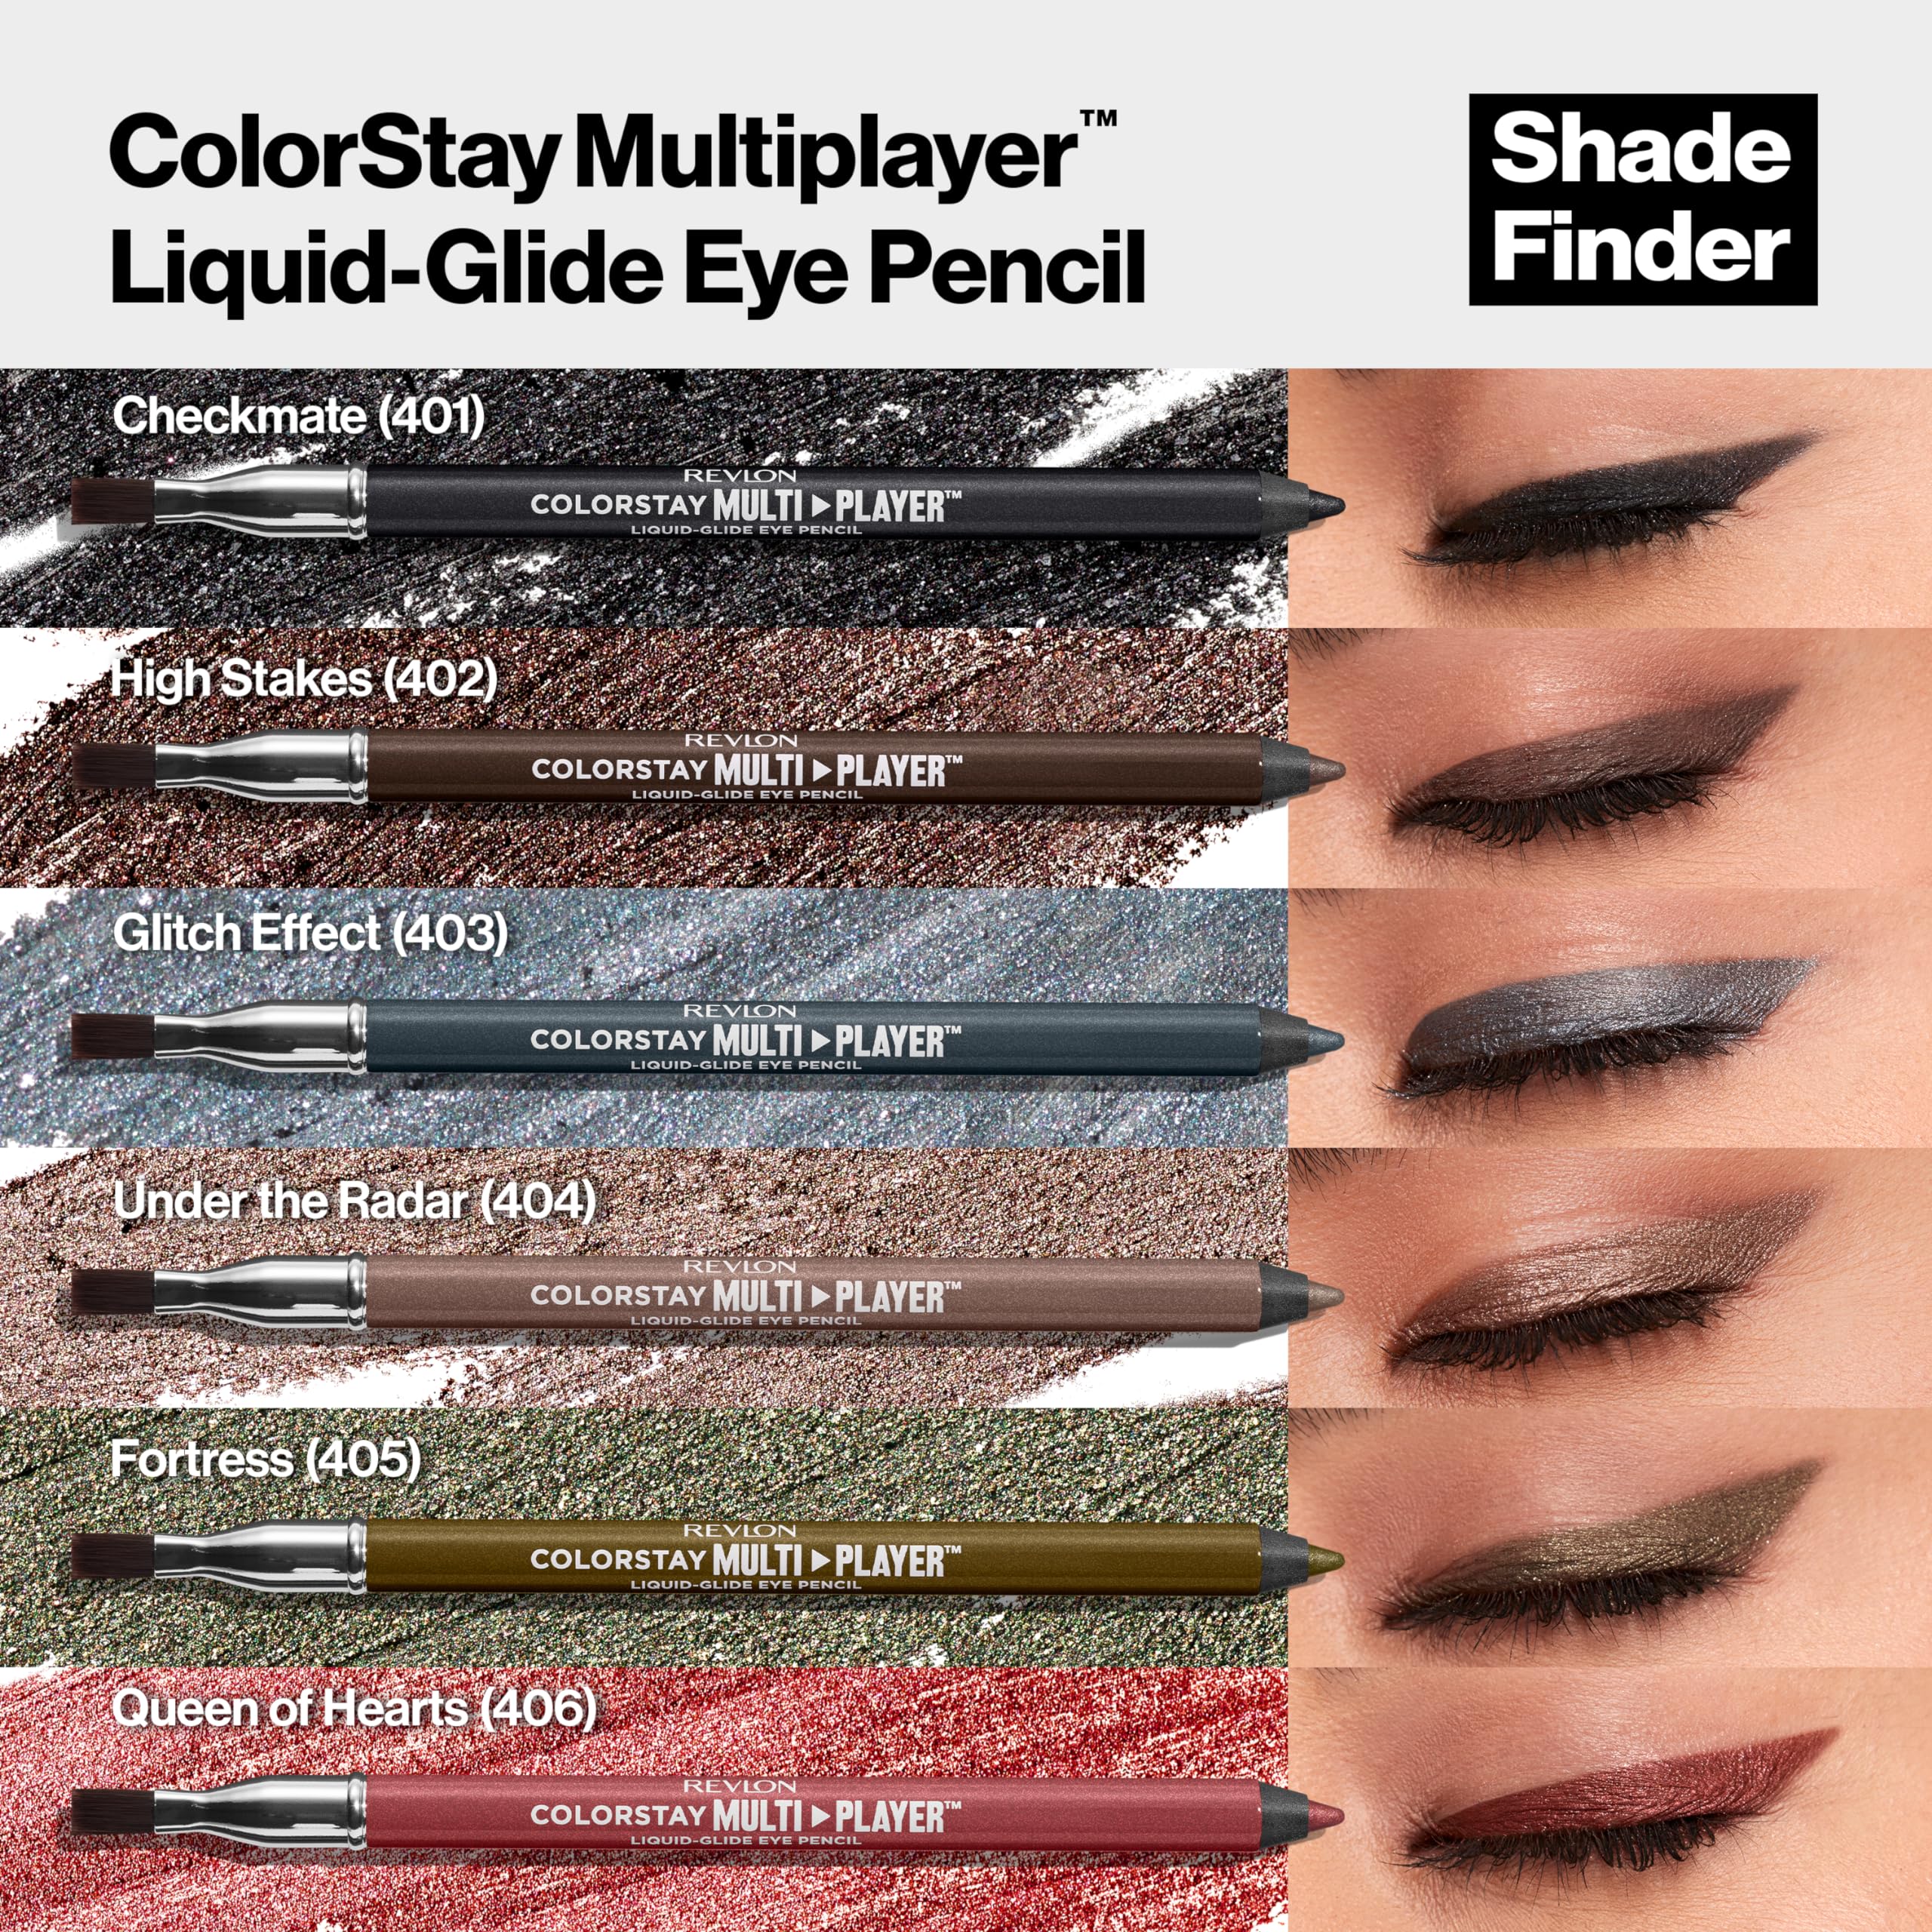 REVLON ColorStay Multiplayer Liquid-Glide Eye Pencil, Multi-Use Eye Makeup With Blending Brush, Blends Then Sets, Creamy Texture, Waterproof, Smudge-proof, Longwearing, 405 Fortress, 0.03 oz